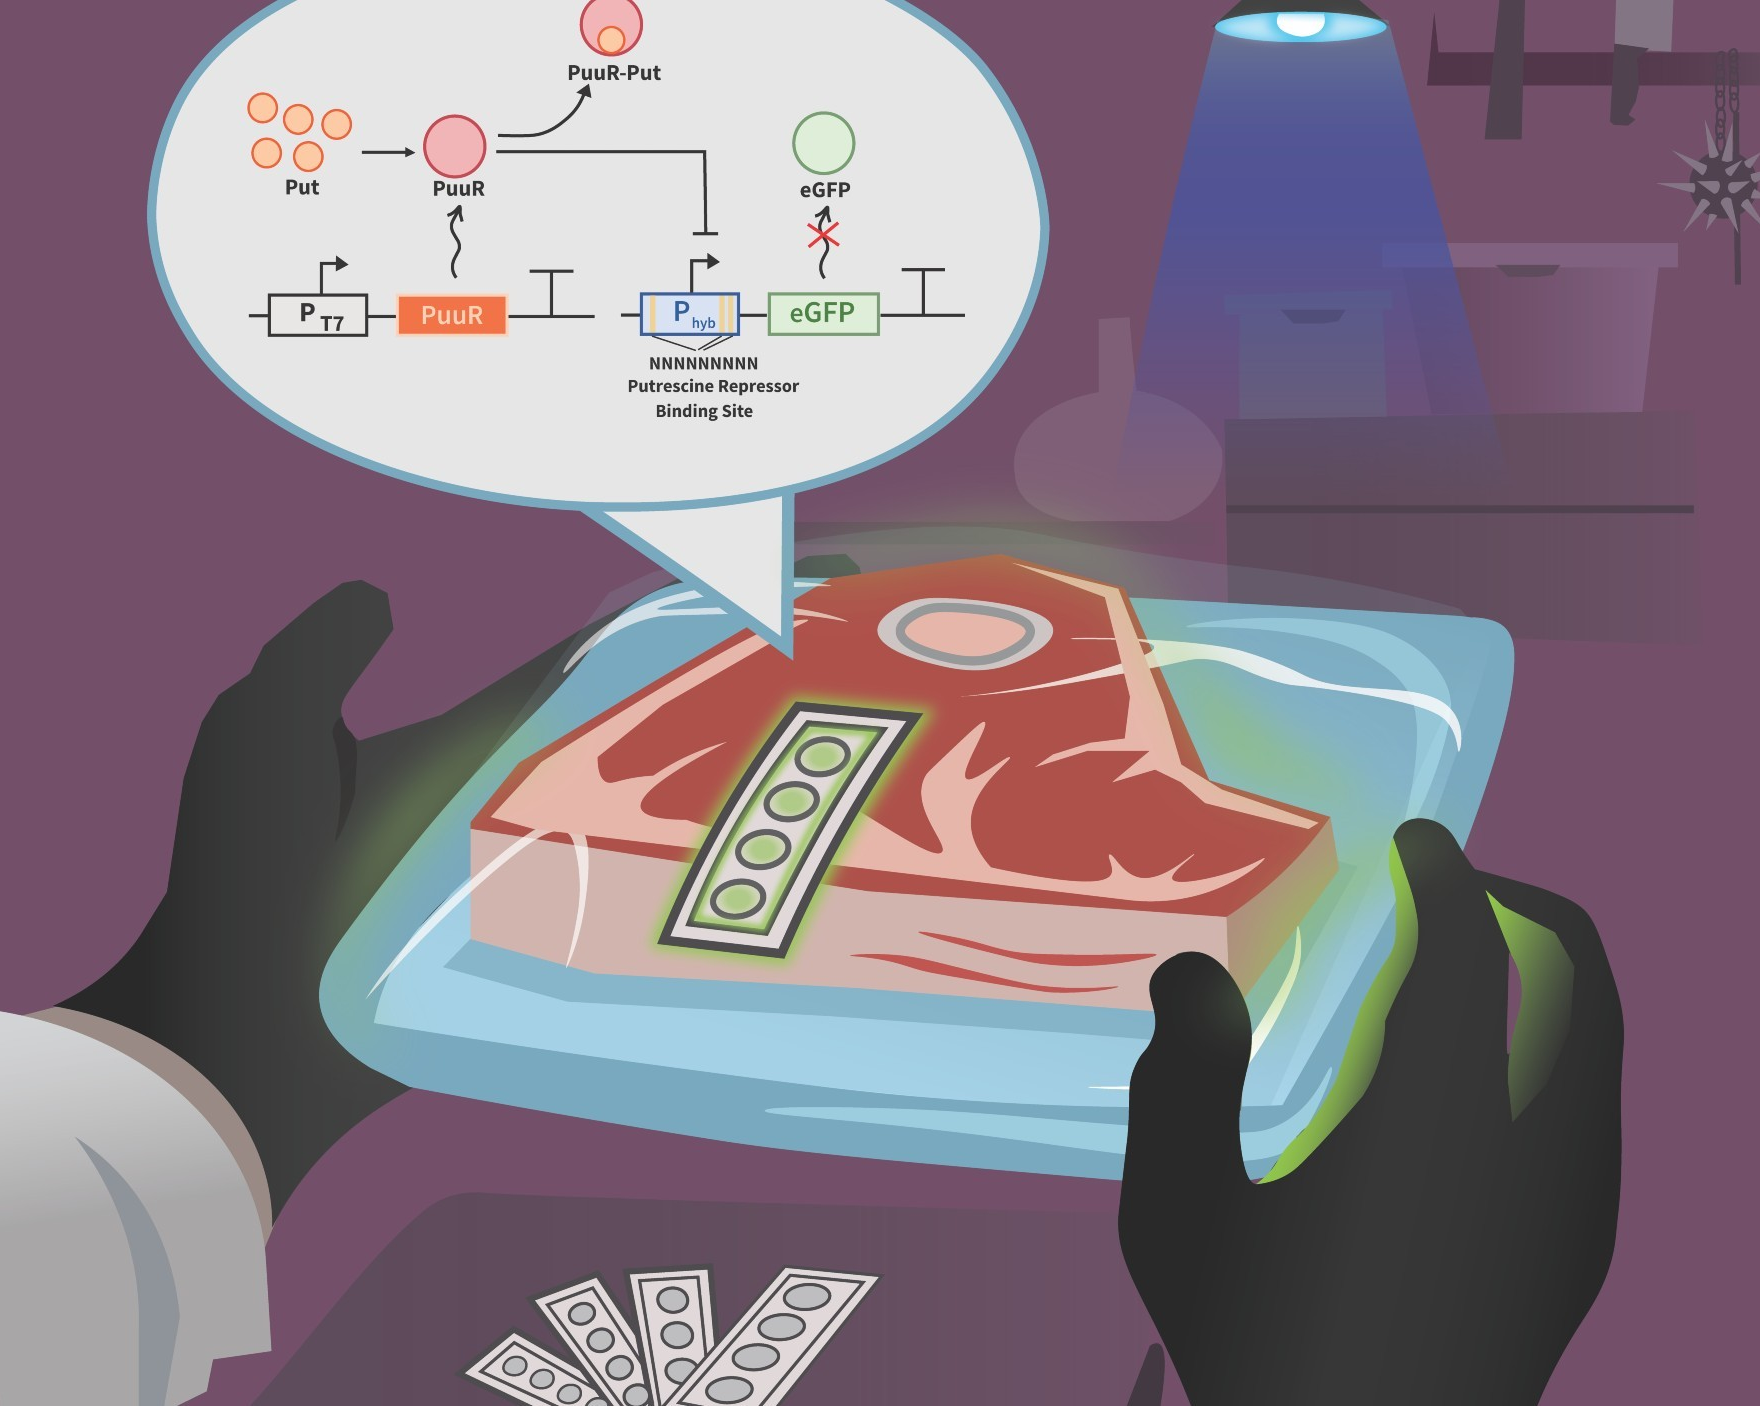 Rotten meat could be easier to detect thanks to a new biosensor system developed at Concordia